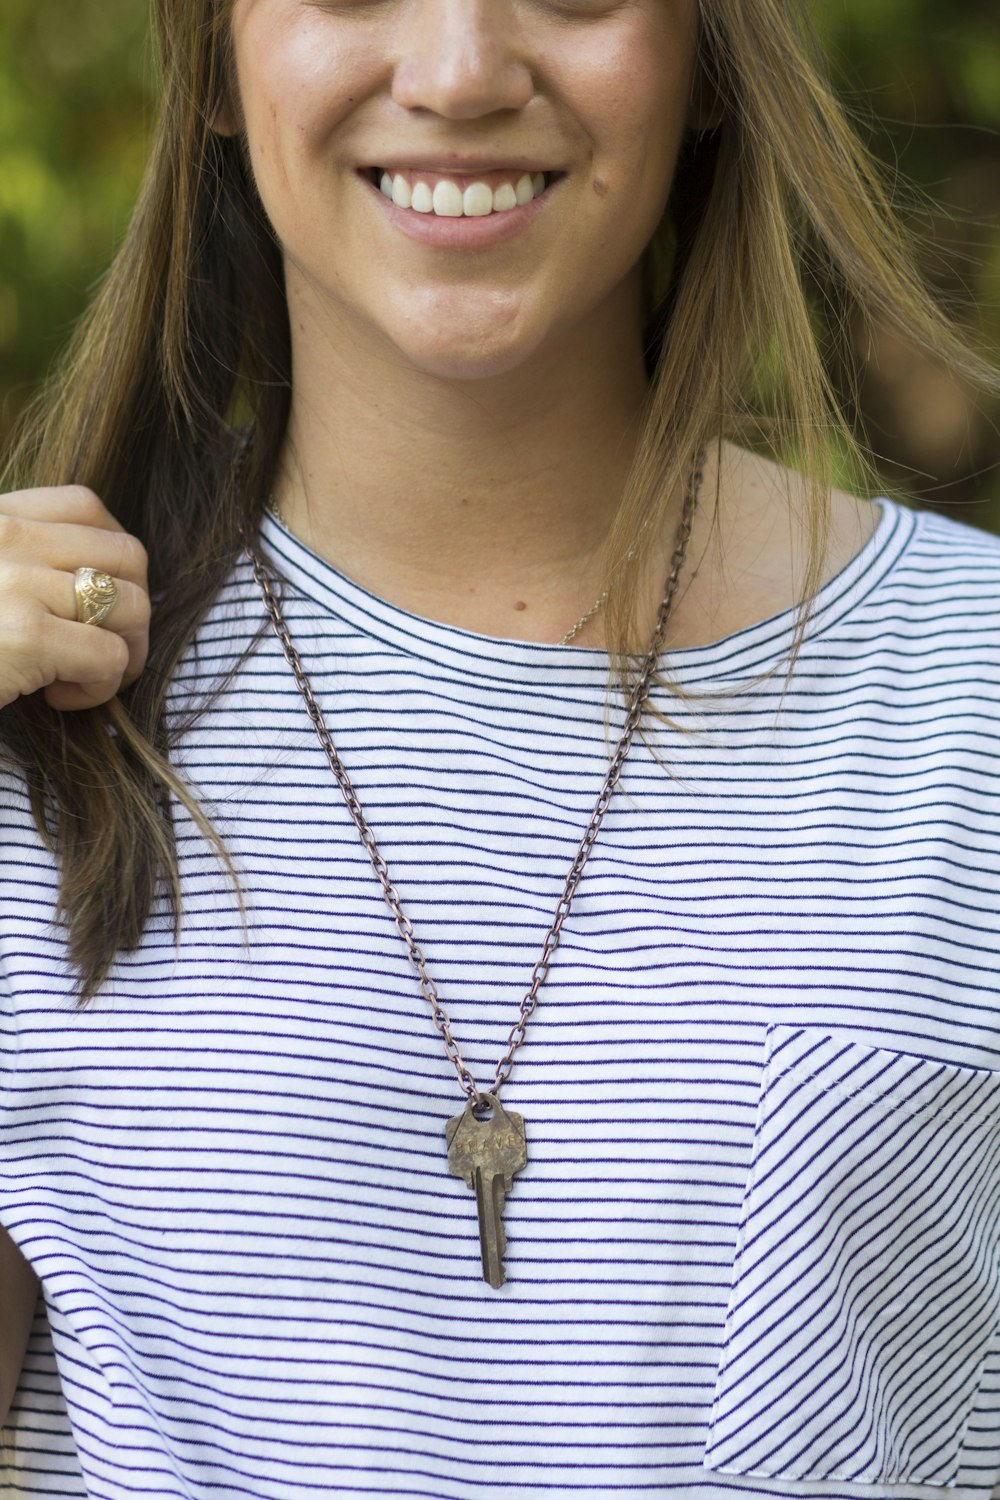 a woman wearing a striped shirt and a necklace